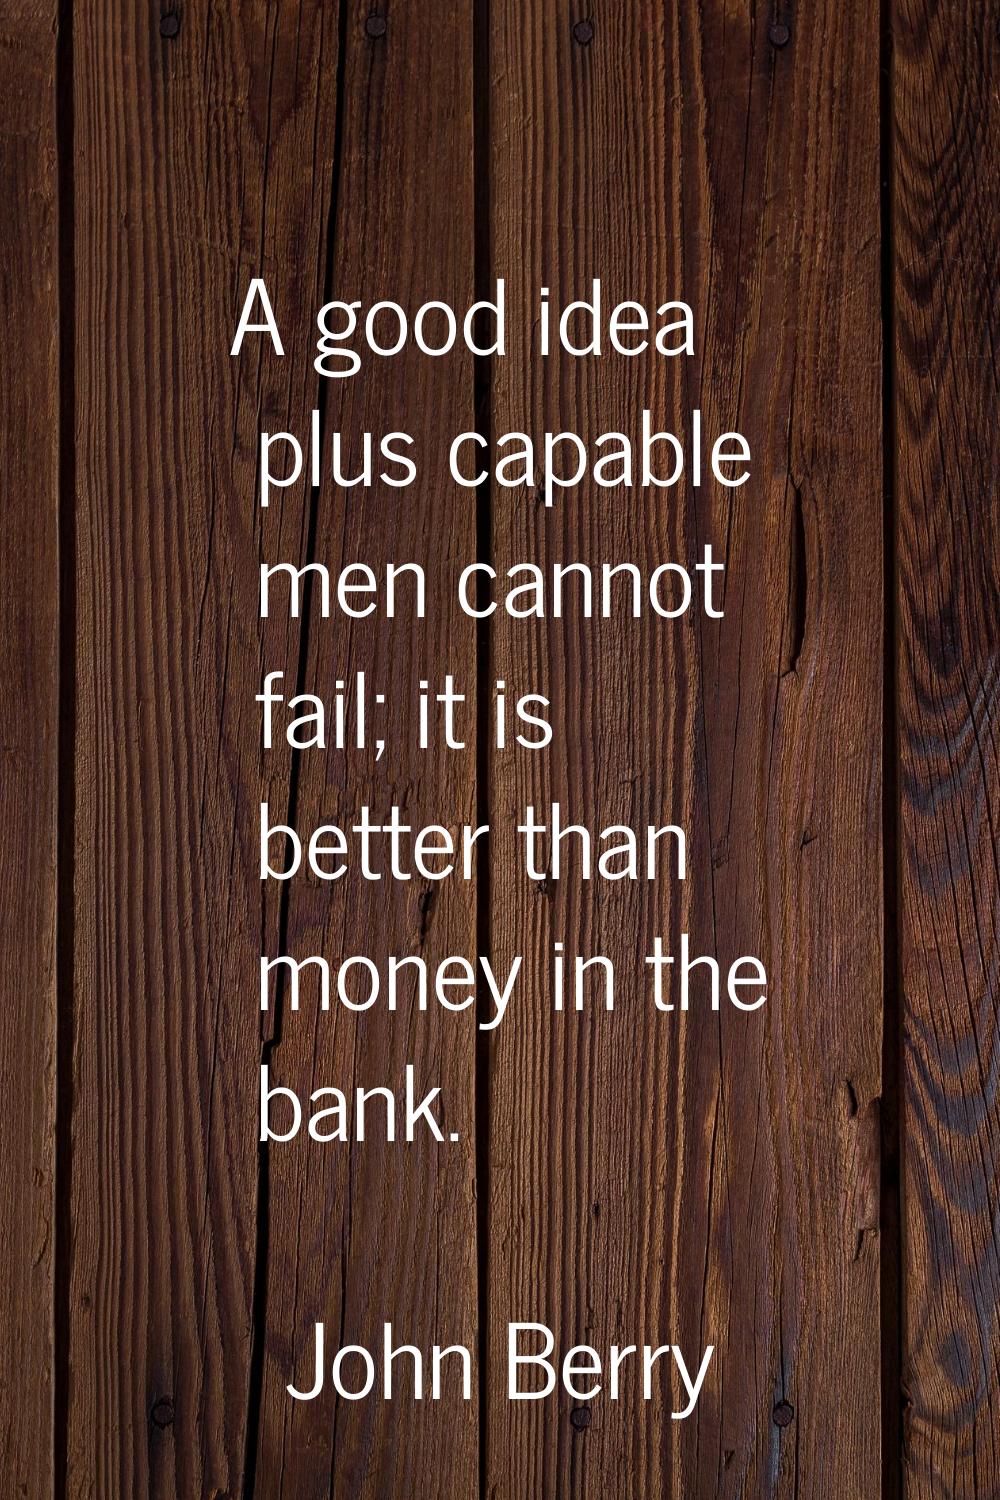 A good idea plus capable men cannot fail; it is better than money in the bank.